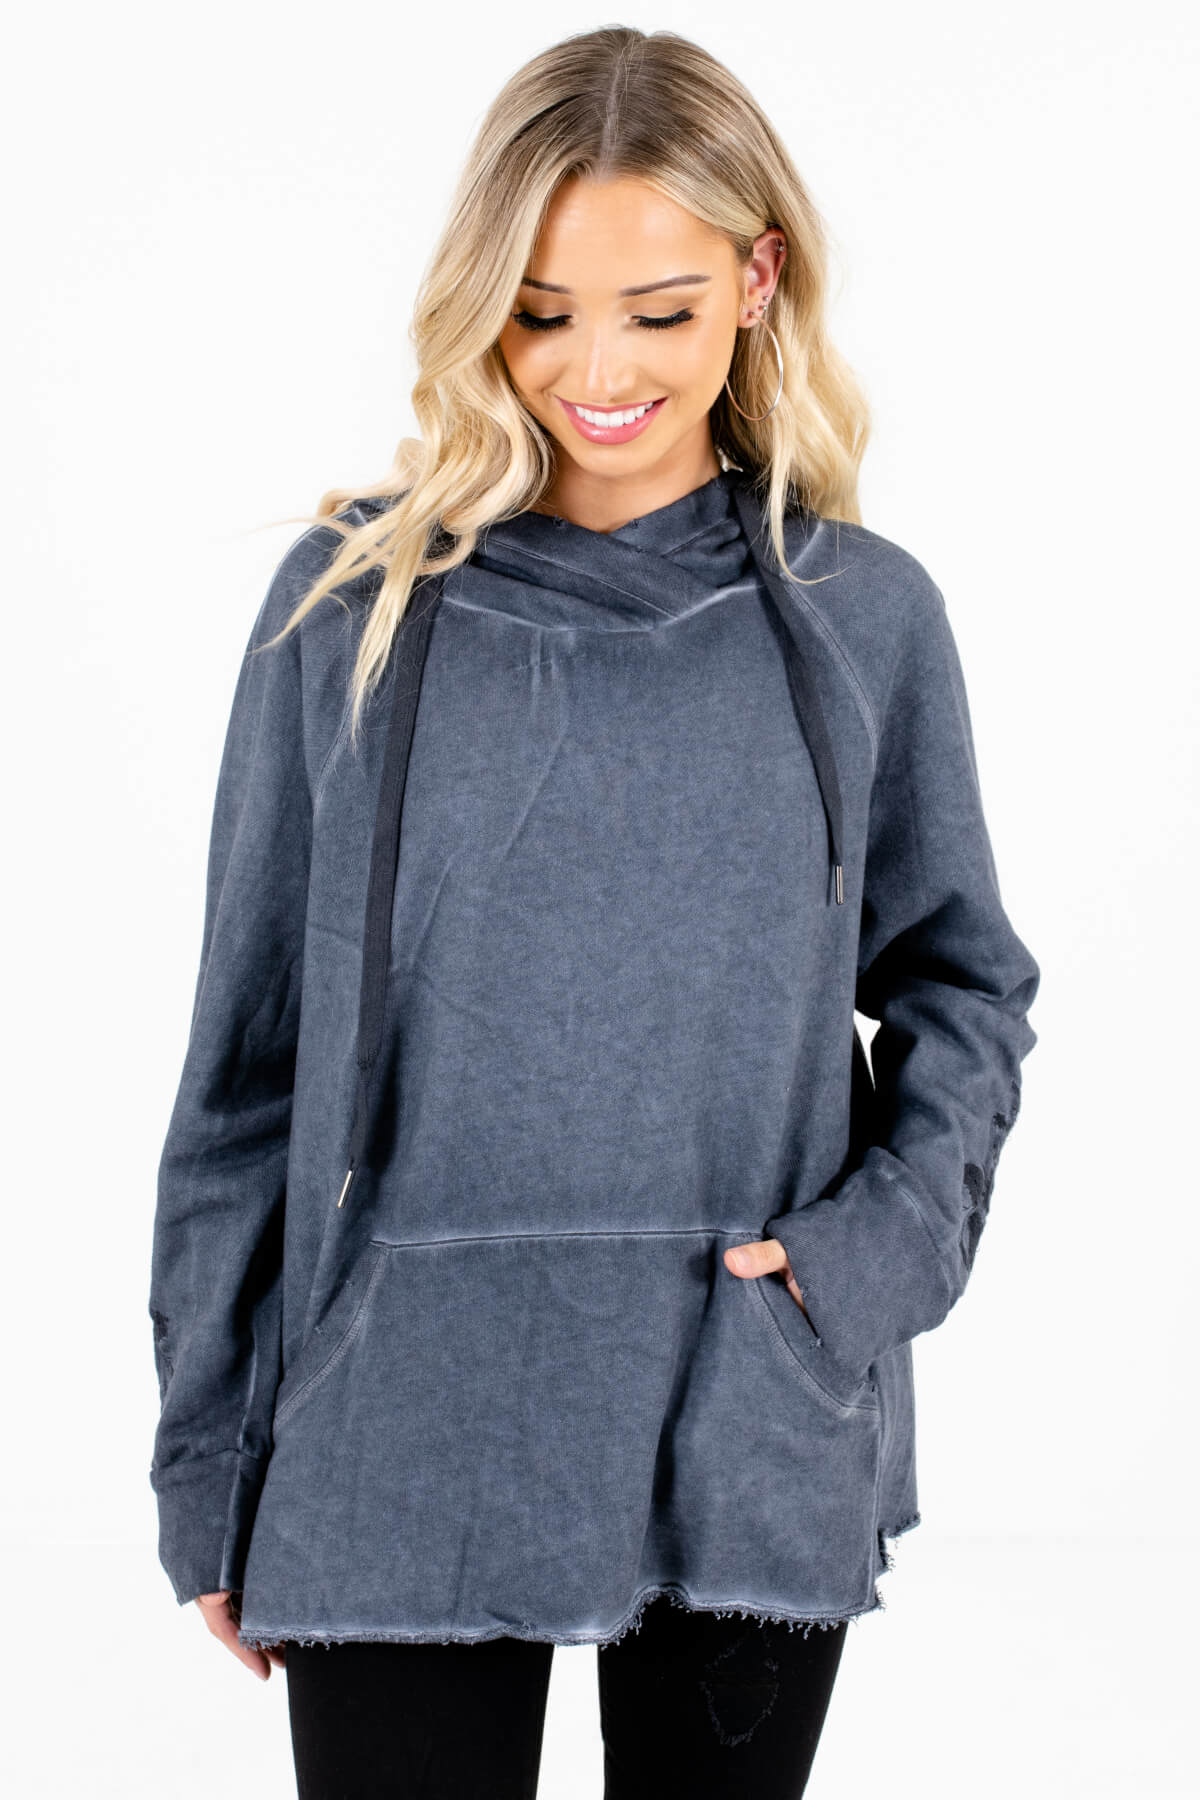 Navy Blue Front Pocket Boutique Hoodies for Women